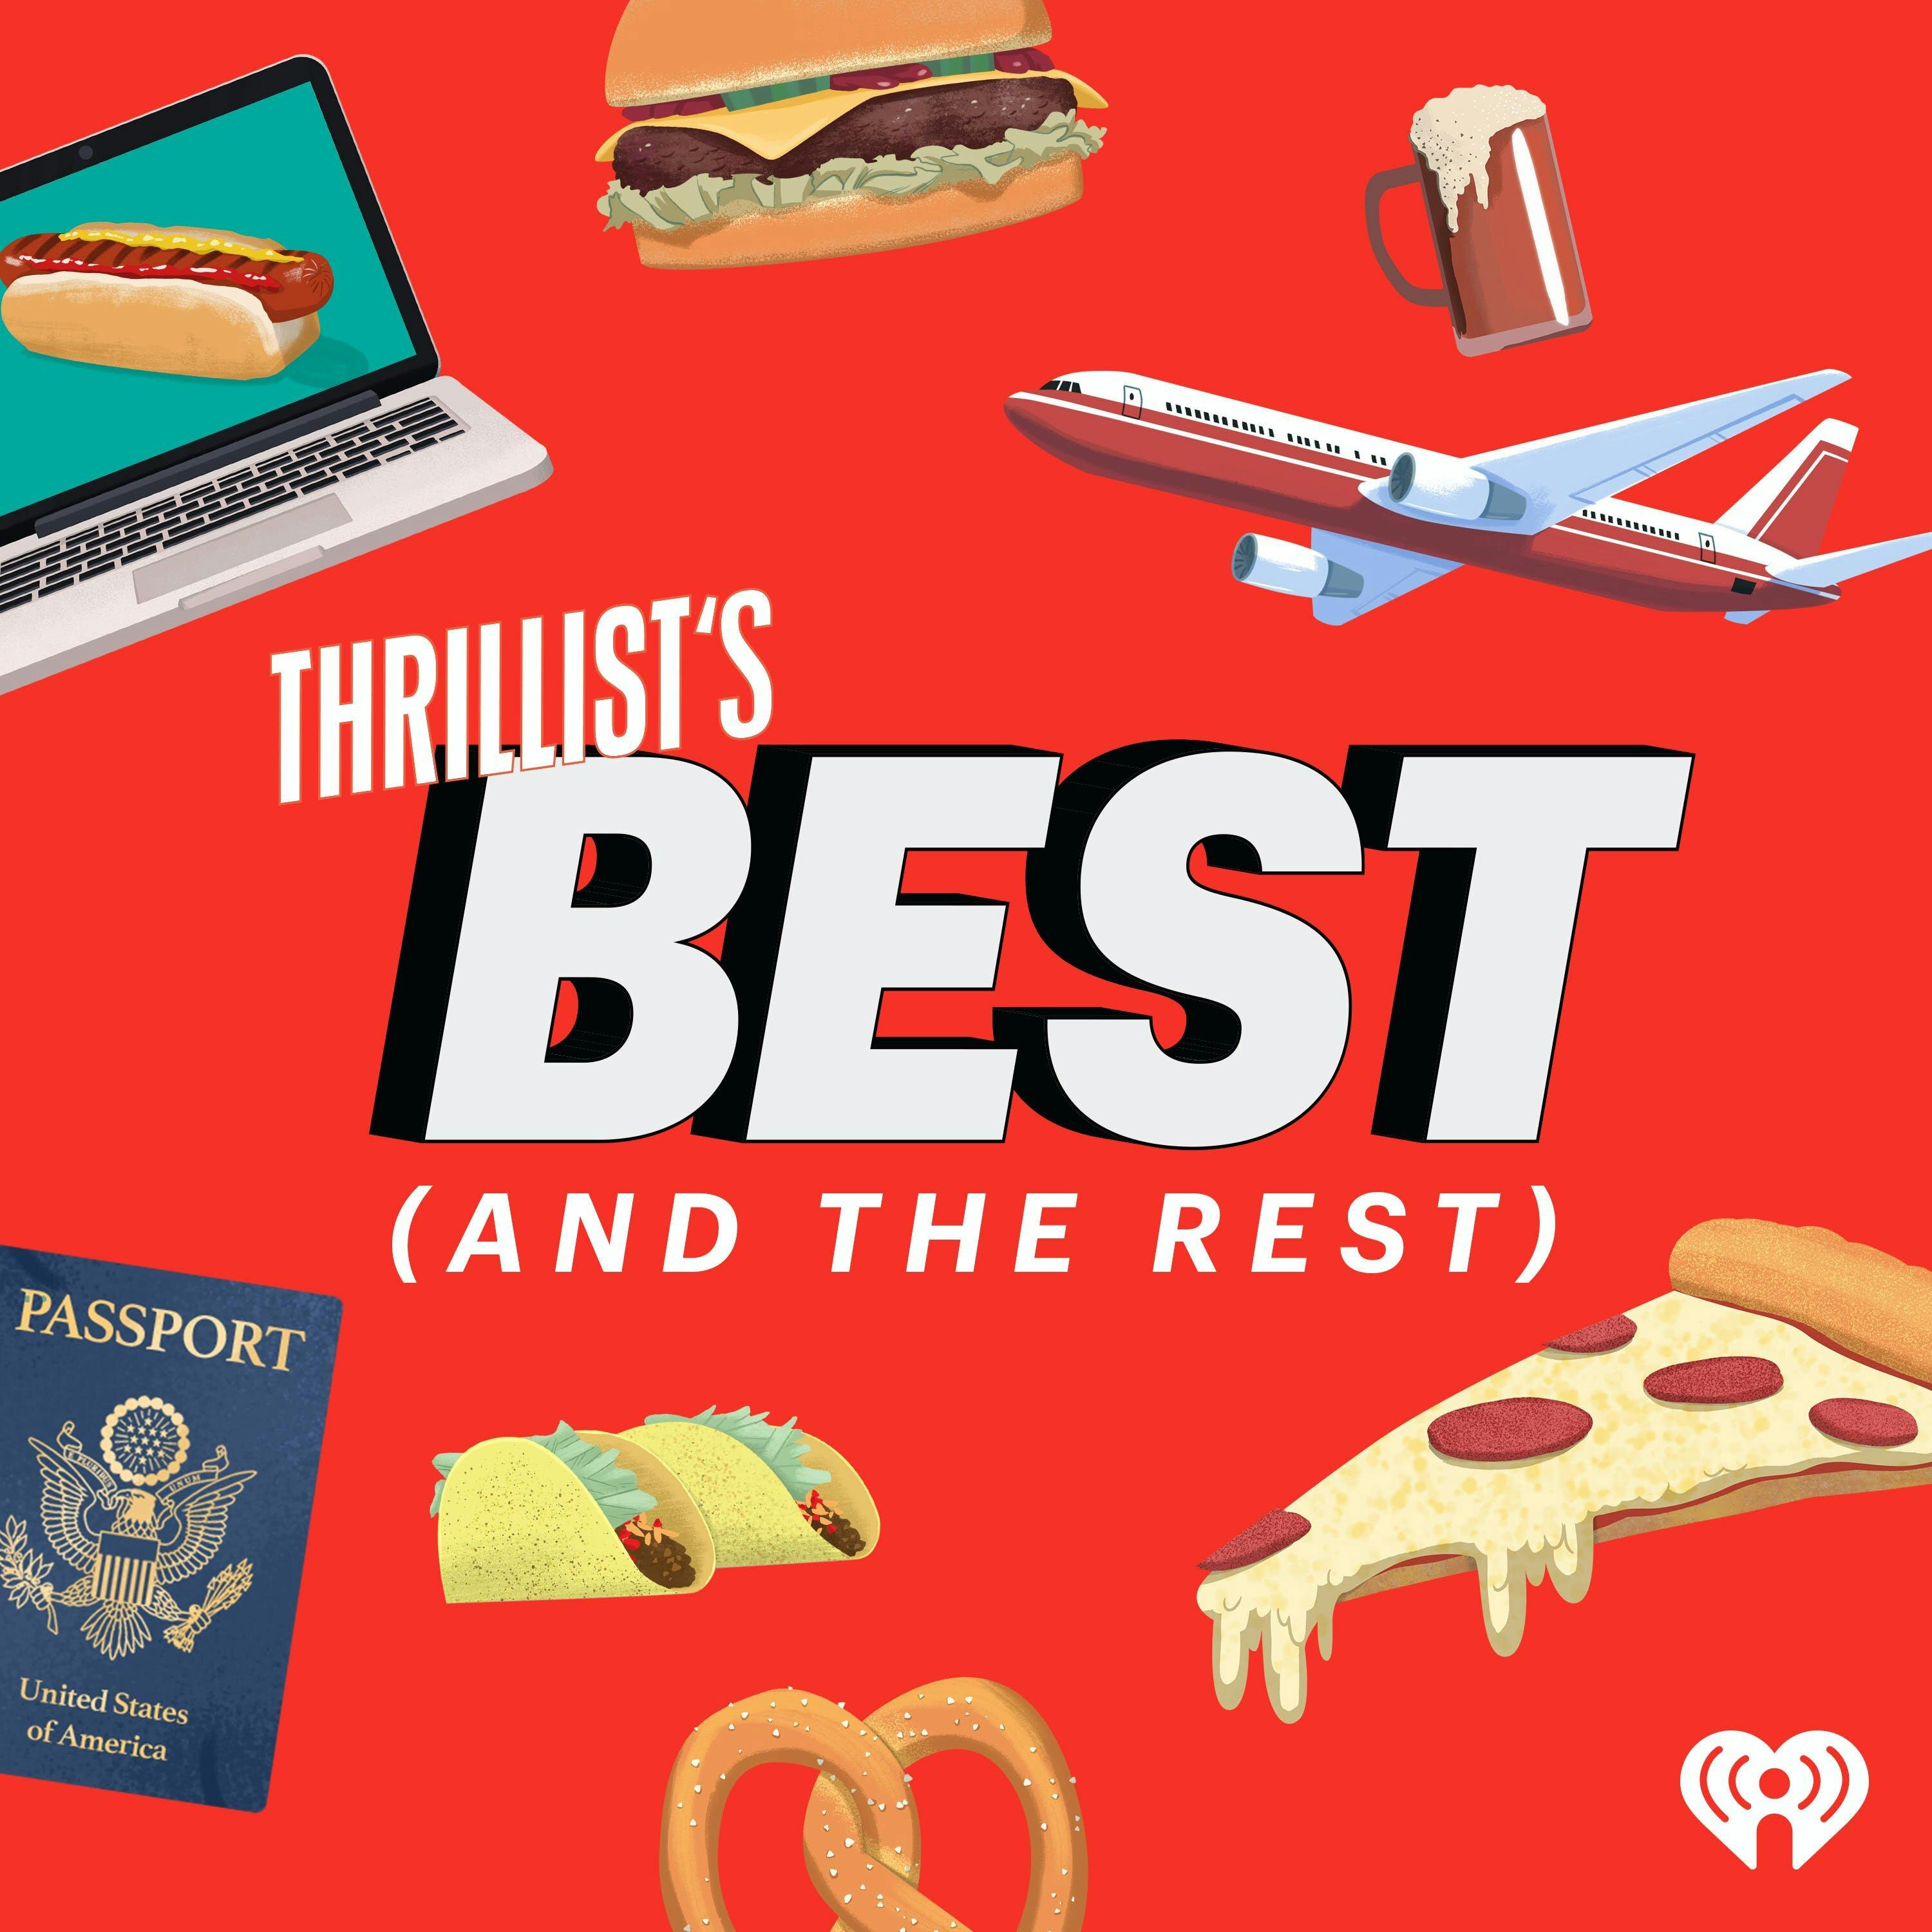 THRILLIST’S BEST: ”Binging with Babish” on the Best Food Movies, Working as a Line Cook, and (Big) Plans for the Future